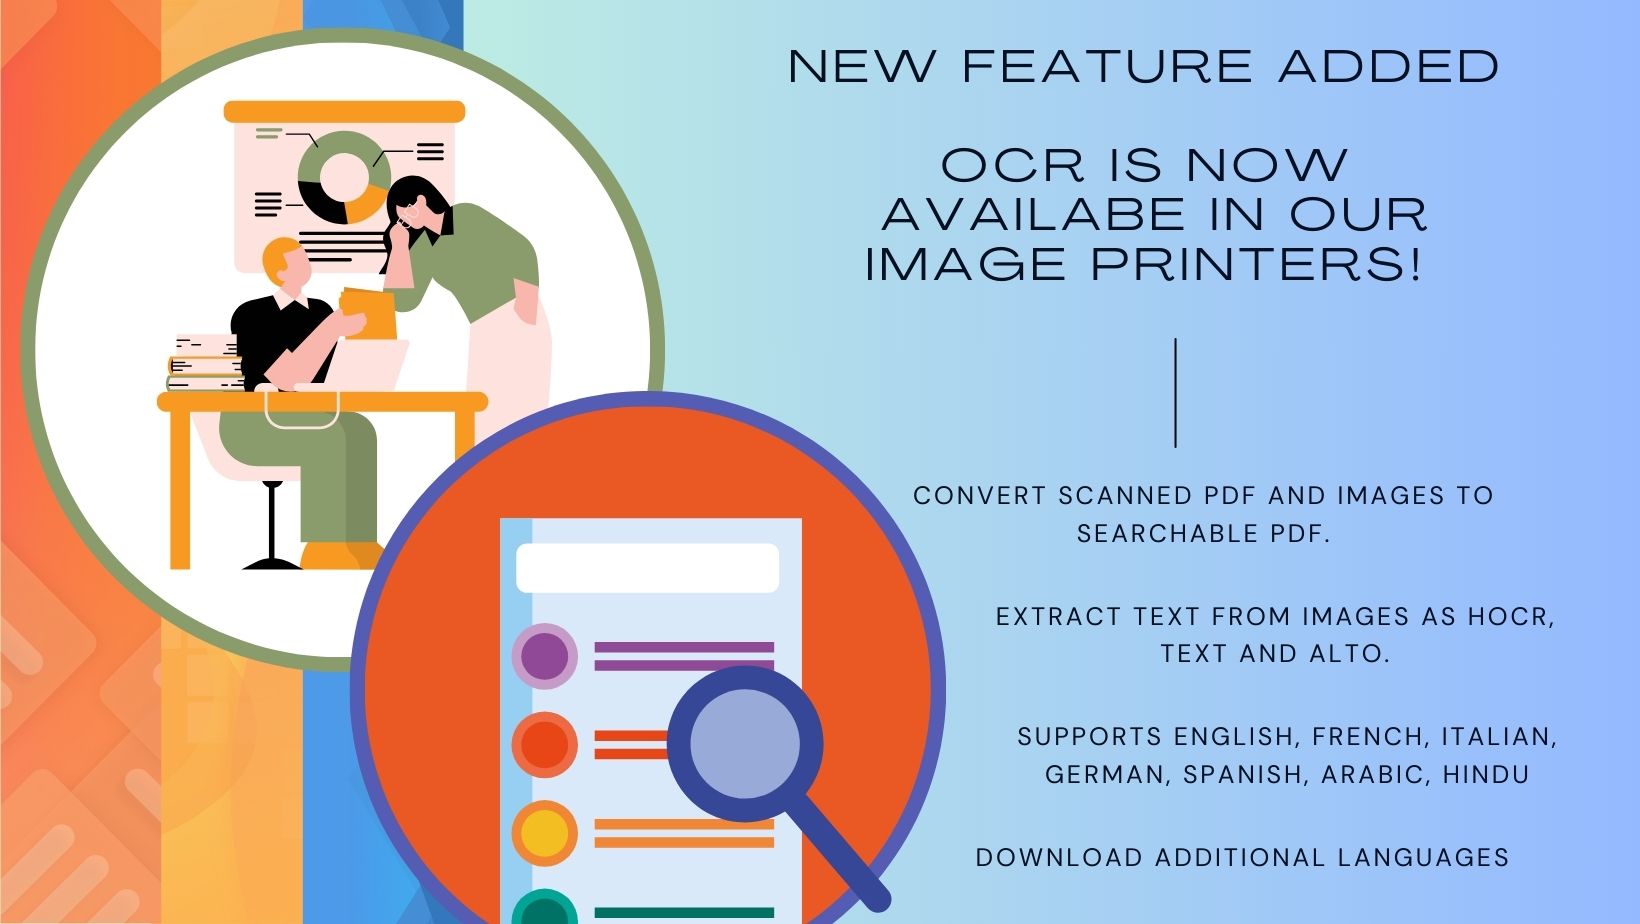 New feature optical character recognition to create searchable pdf and extract text from images.